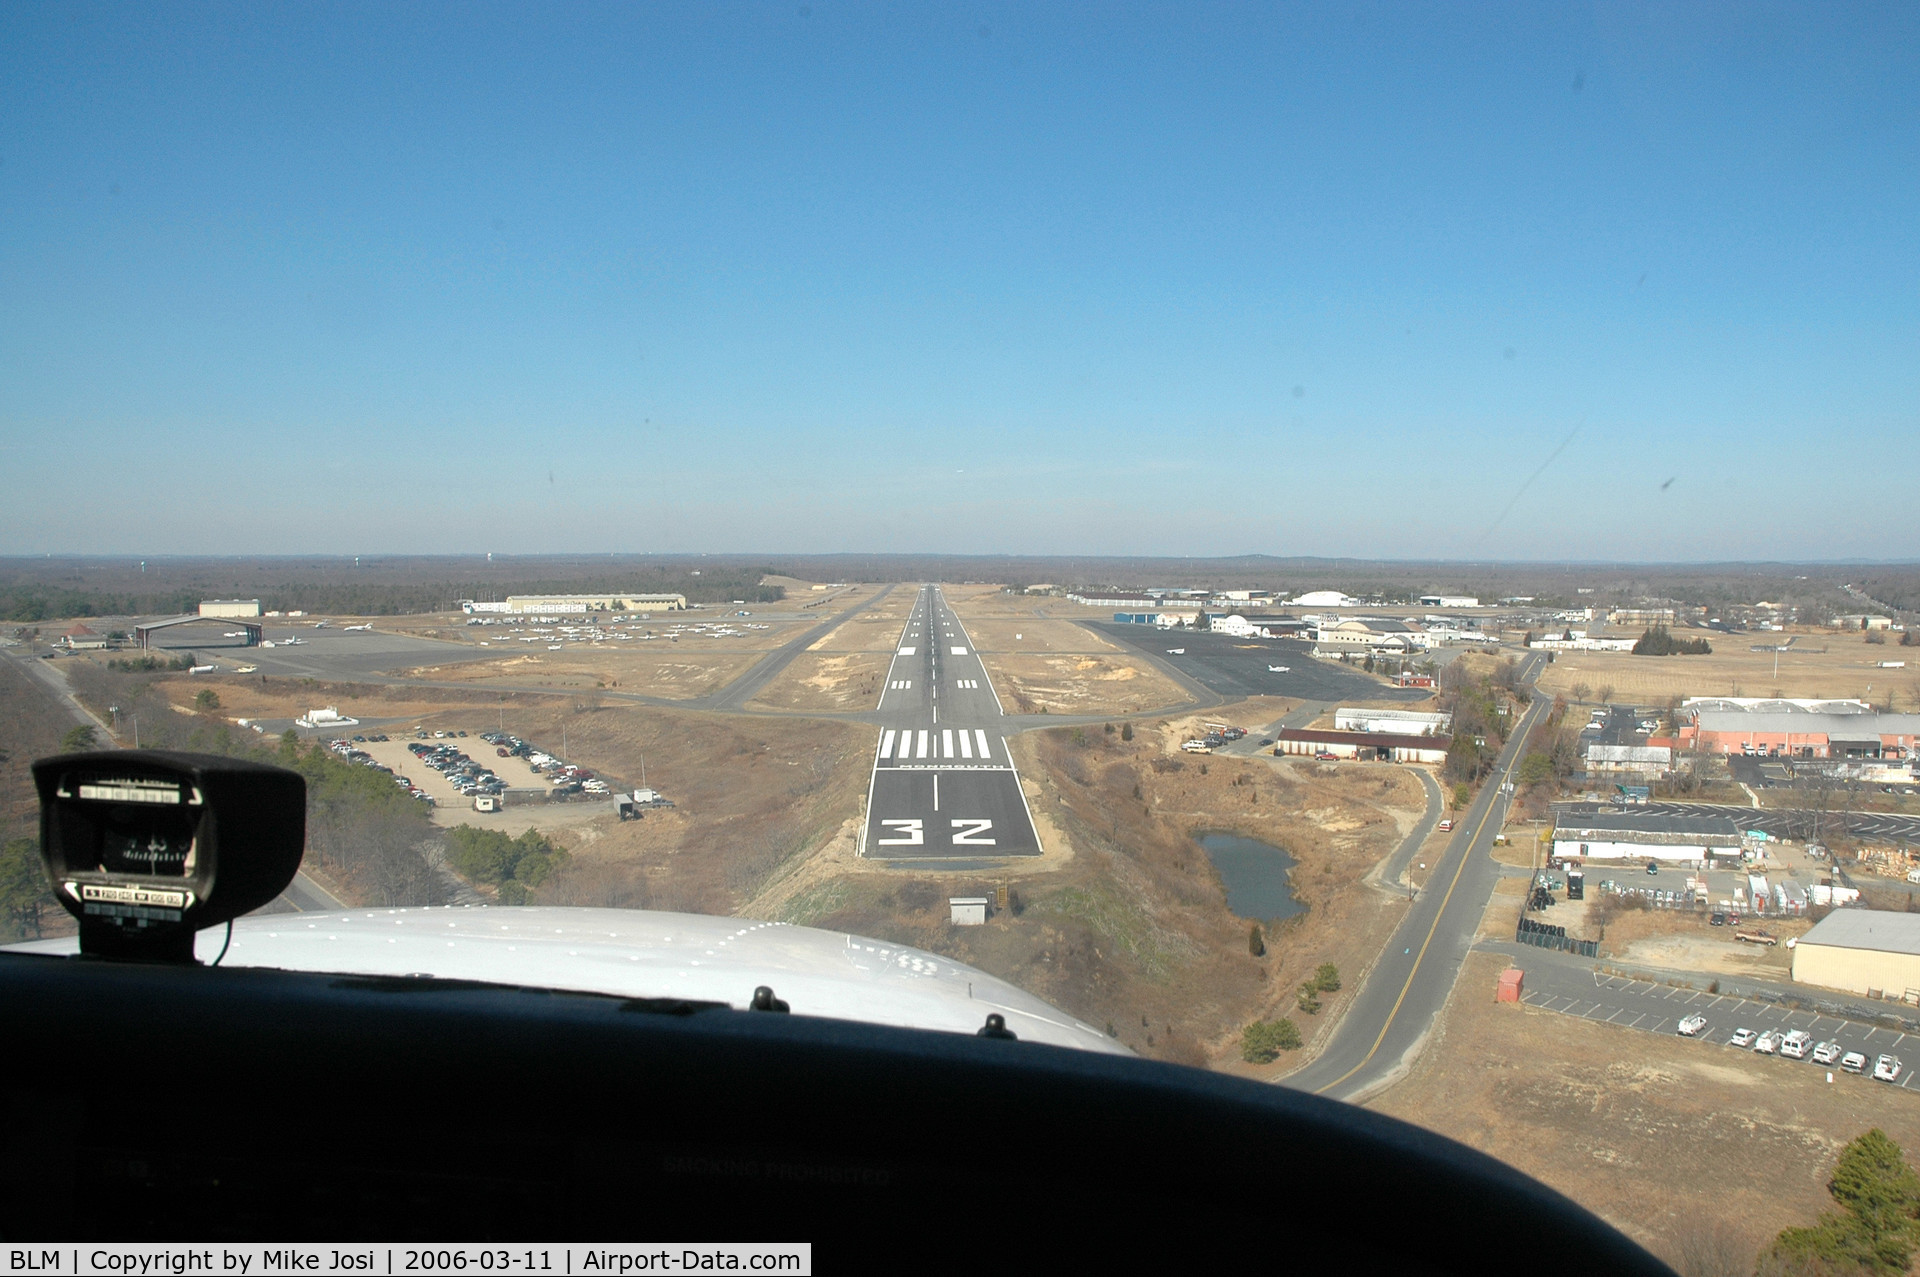 Monmouth Executive Airport (BLM) - Short Final Runway 32, Cessna 172, right seat